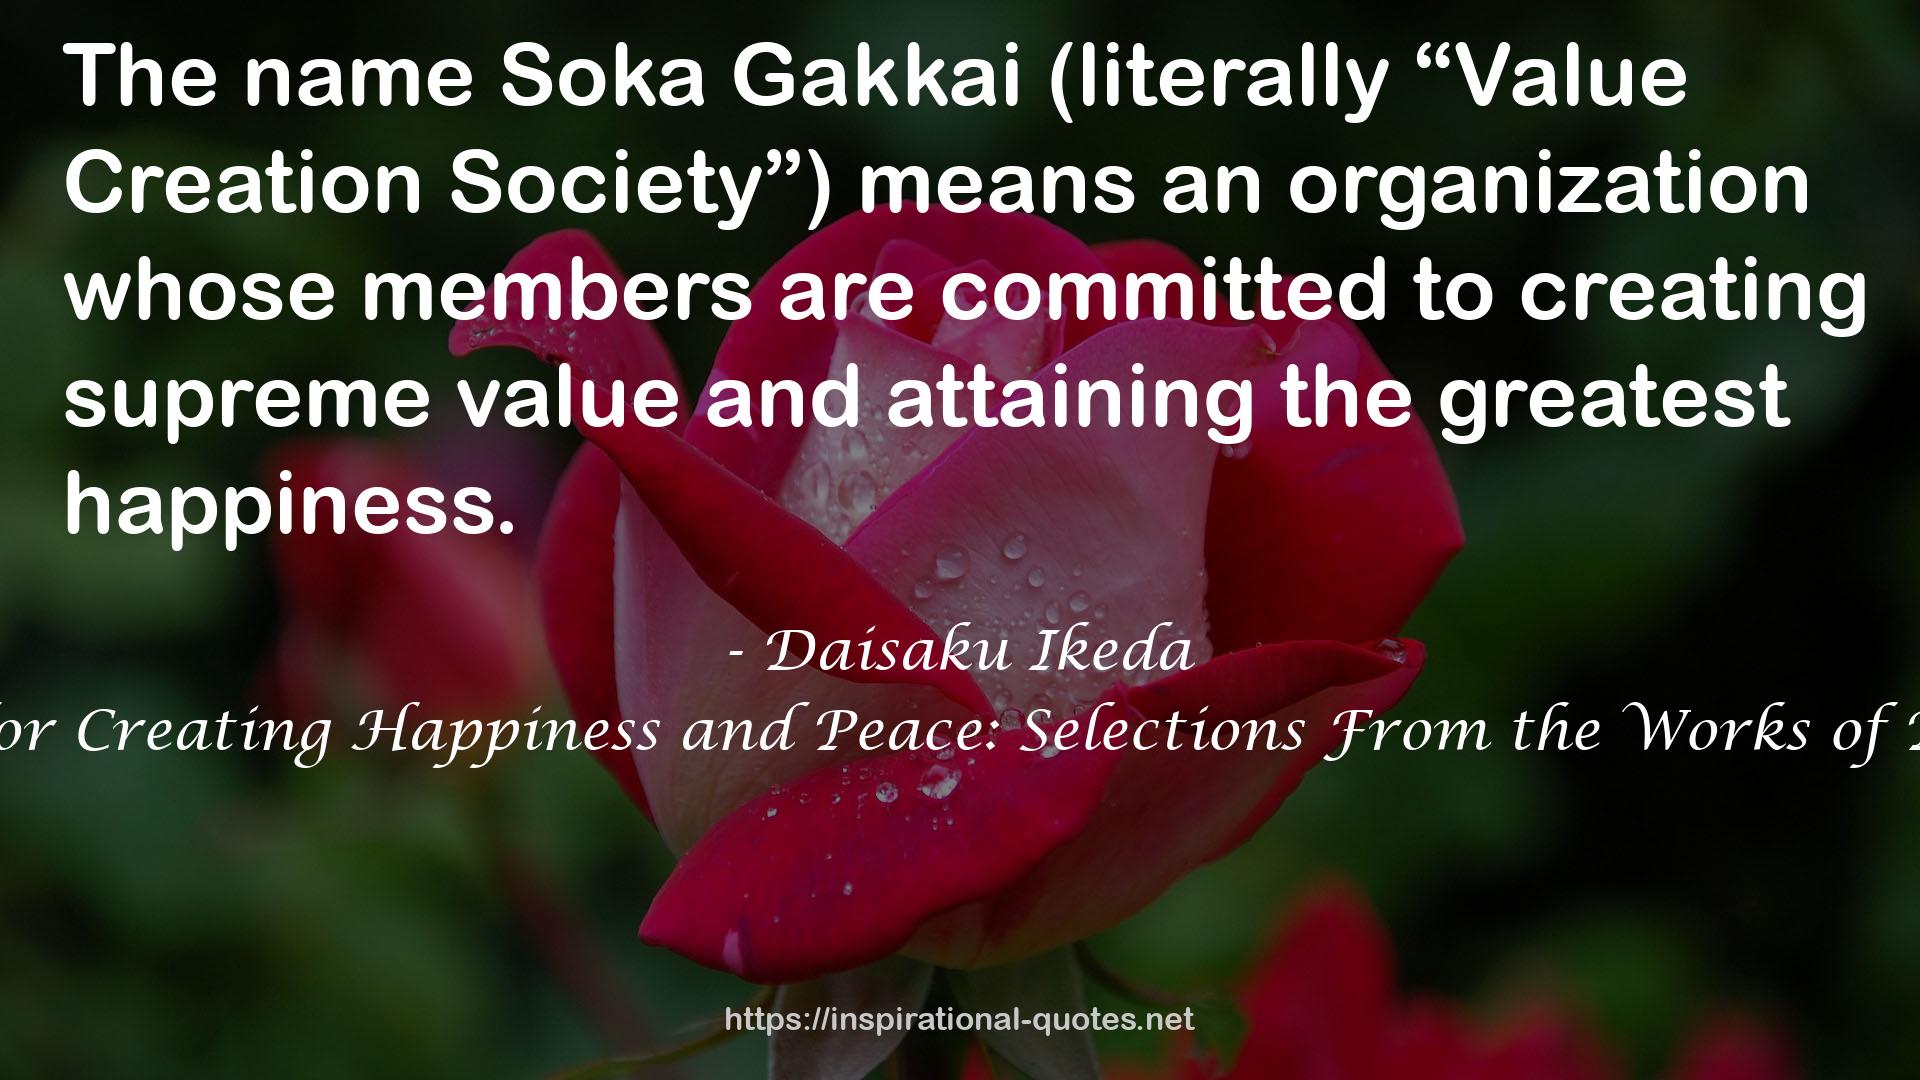 The Wisdom for Creating Happiness and Peace: Selections From the Works of Daisaku Ikeda QUOTES